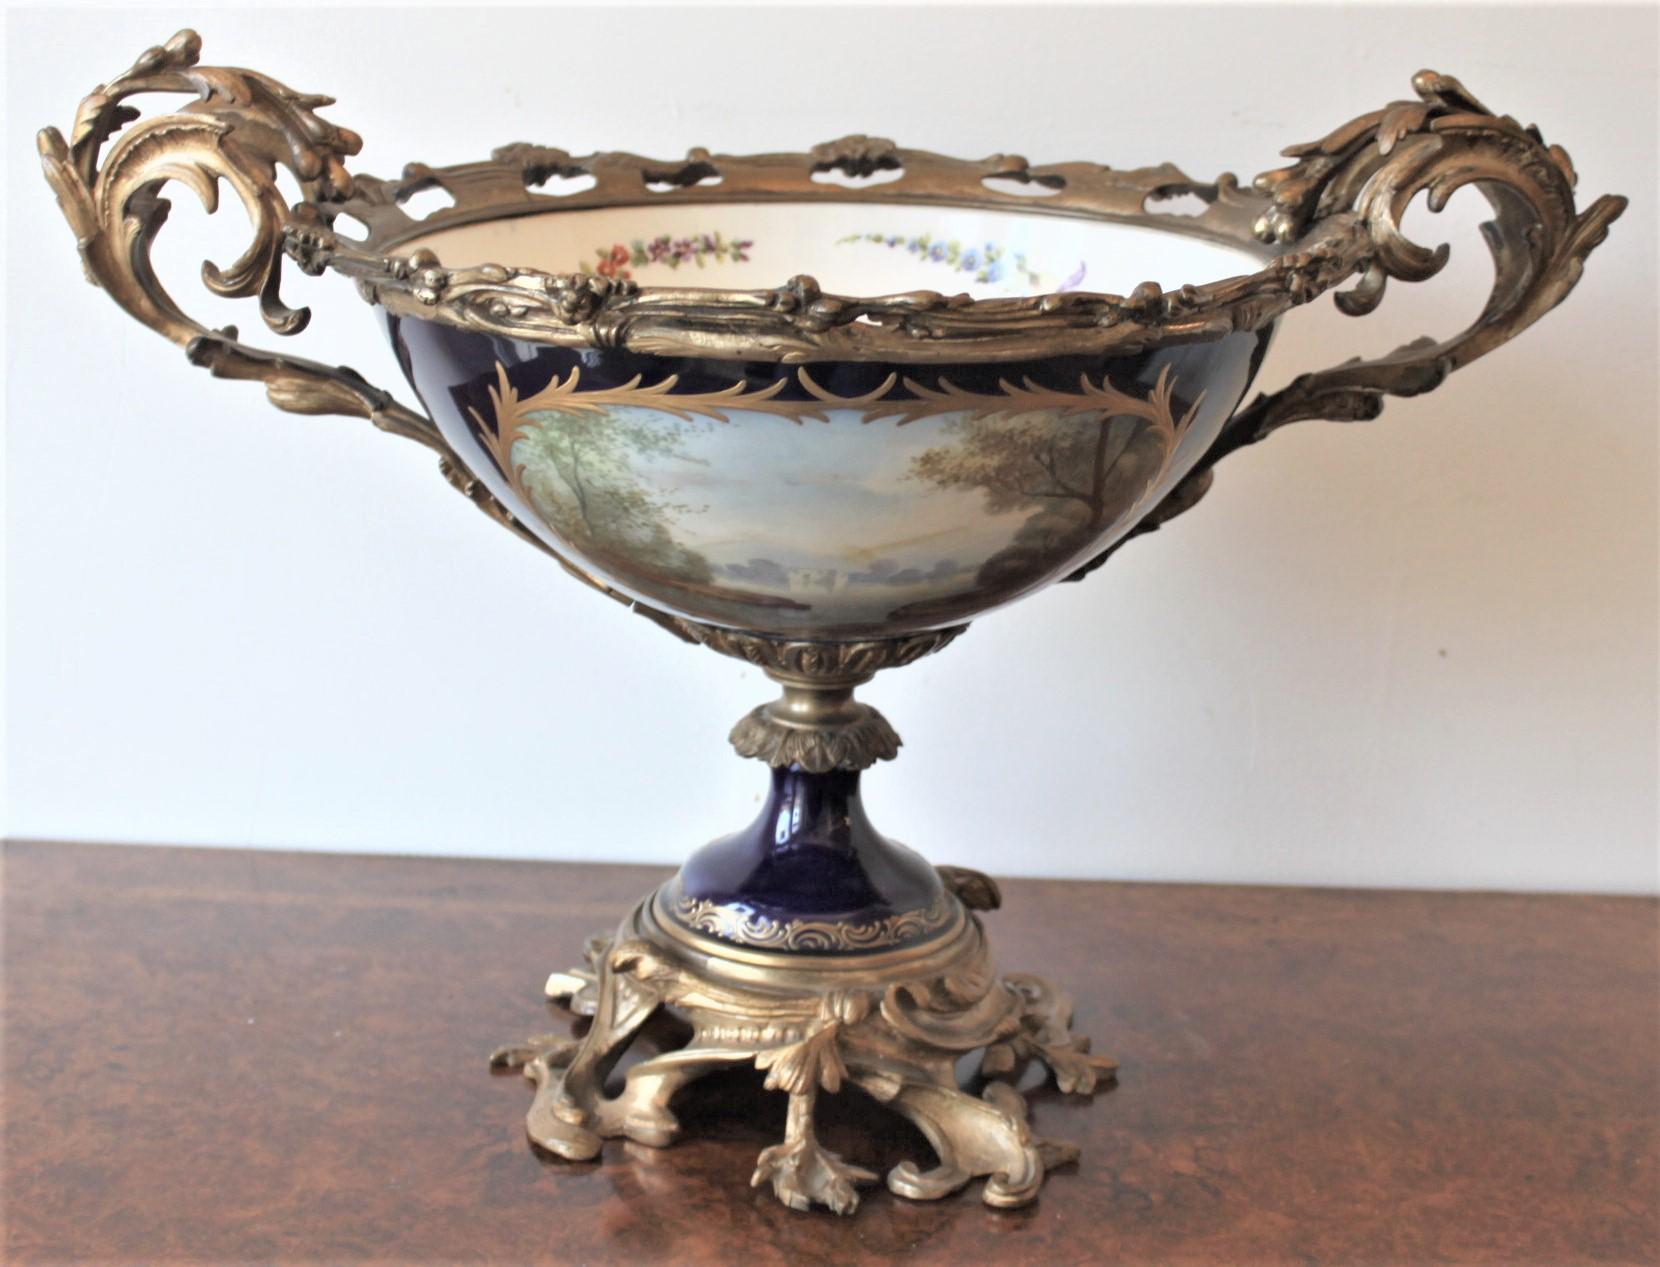 Hand-Crafted Antique Sevres Ormolu-Mounted and Hand Painted Porcelain Centerpiece or Compote